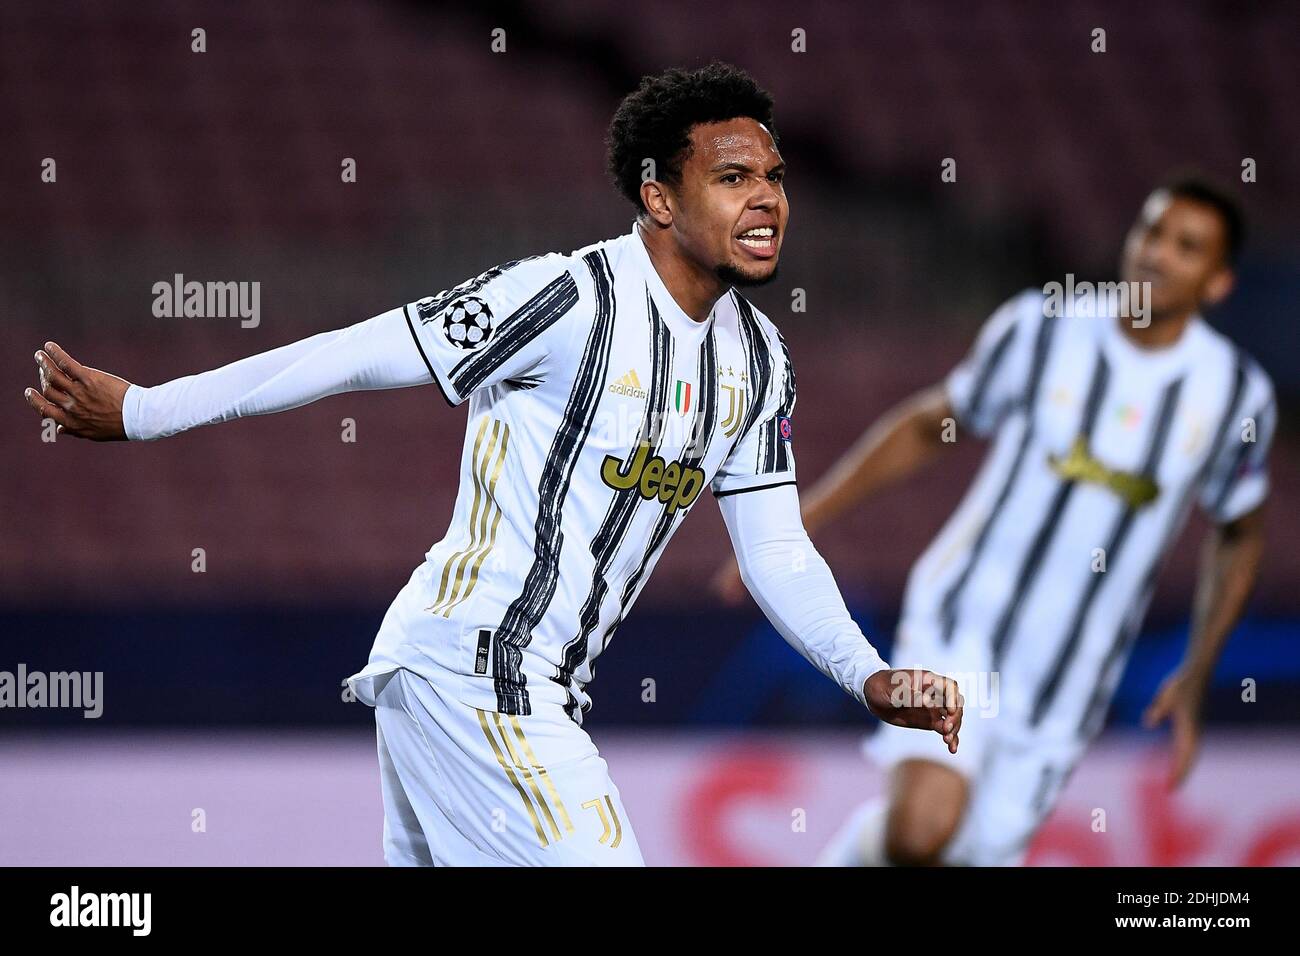 Barcelona, Spain - 08 December, 2020: Weston McKennie of Juventus FC celebrates after scoring a goal during the UEFA Champions League Group G football match between FC Barcelona and Juventus. Juventus FC won 3-0 over FC Barcelona. Credit: Nicolò Campo/Alamy Live News Stock Photo